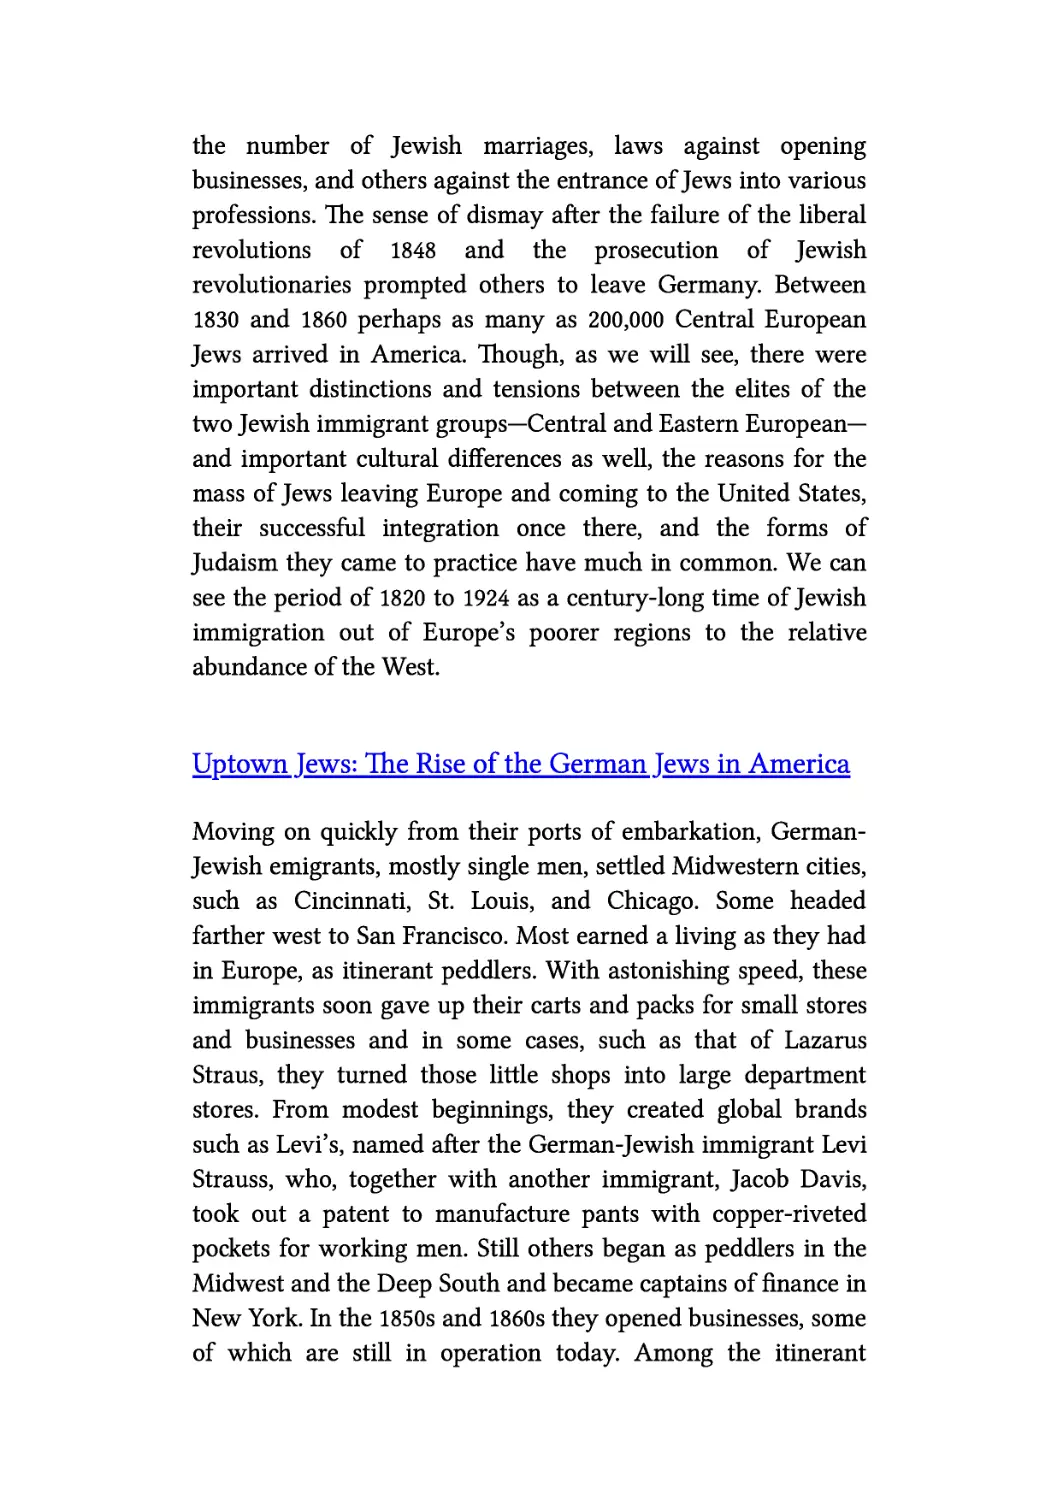 Uptown Jews: The Rise of the German Jews in America